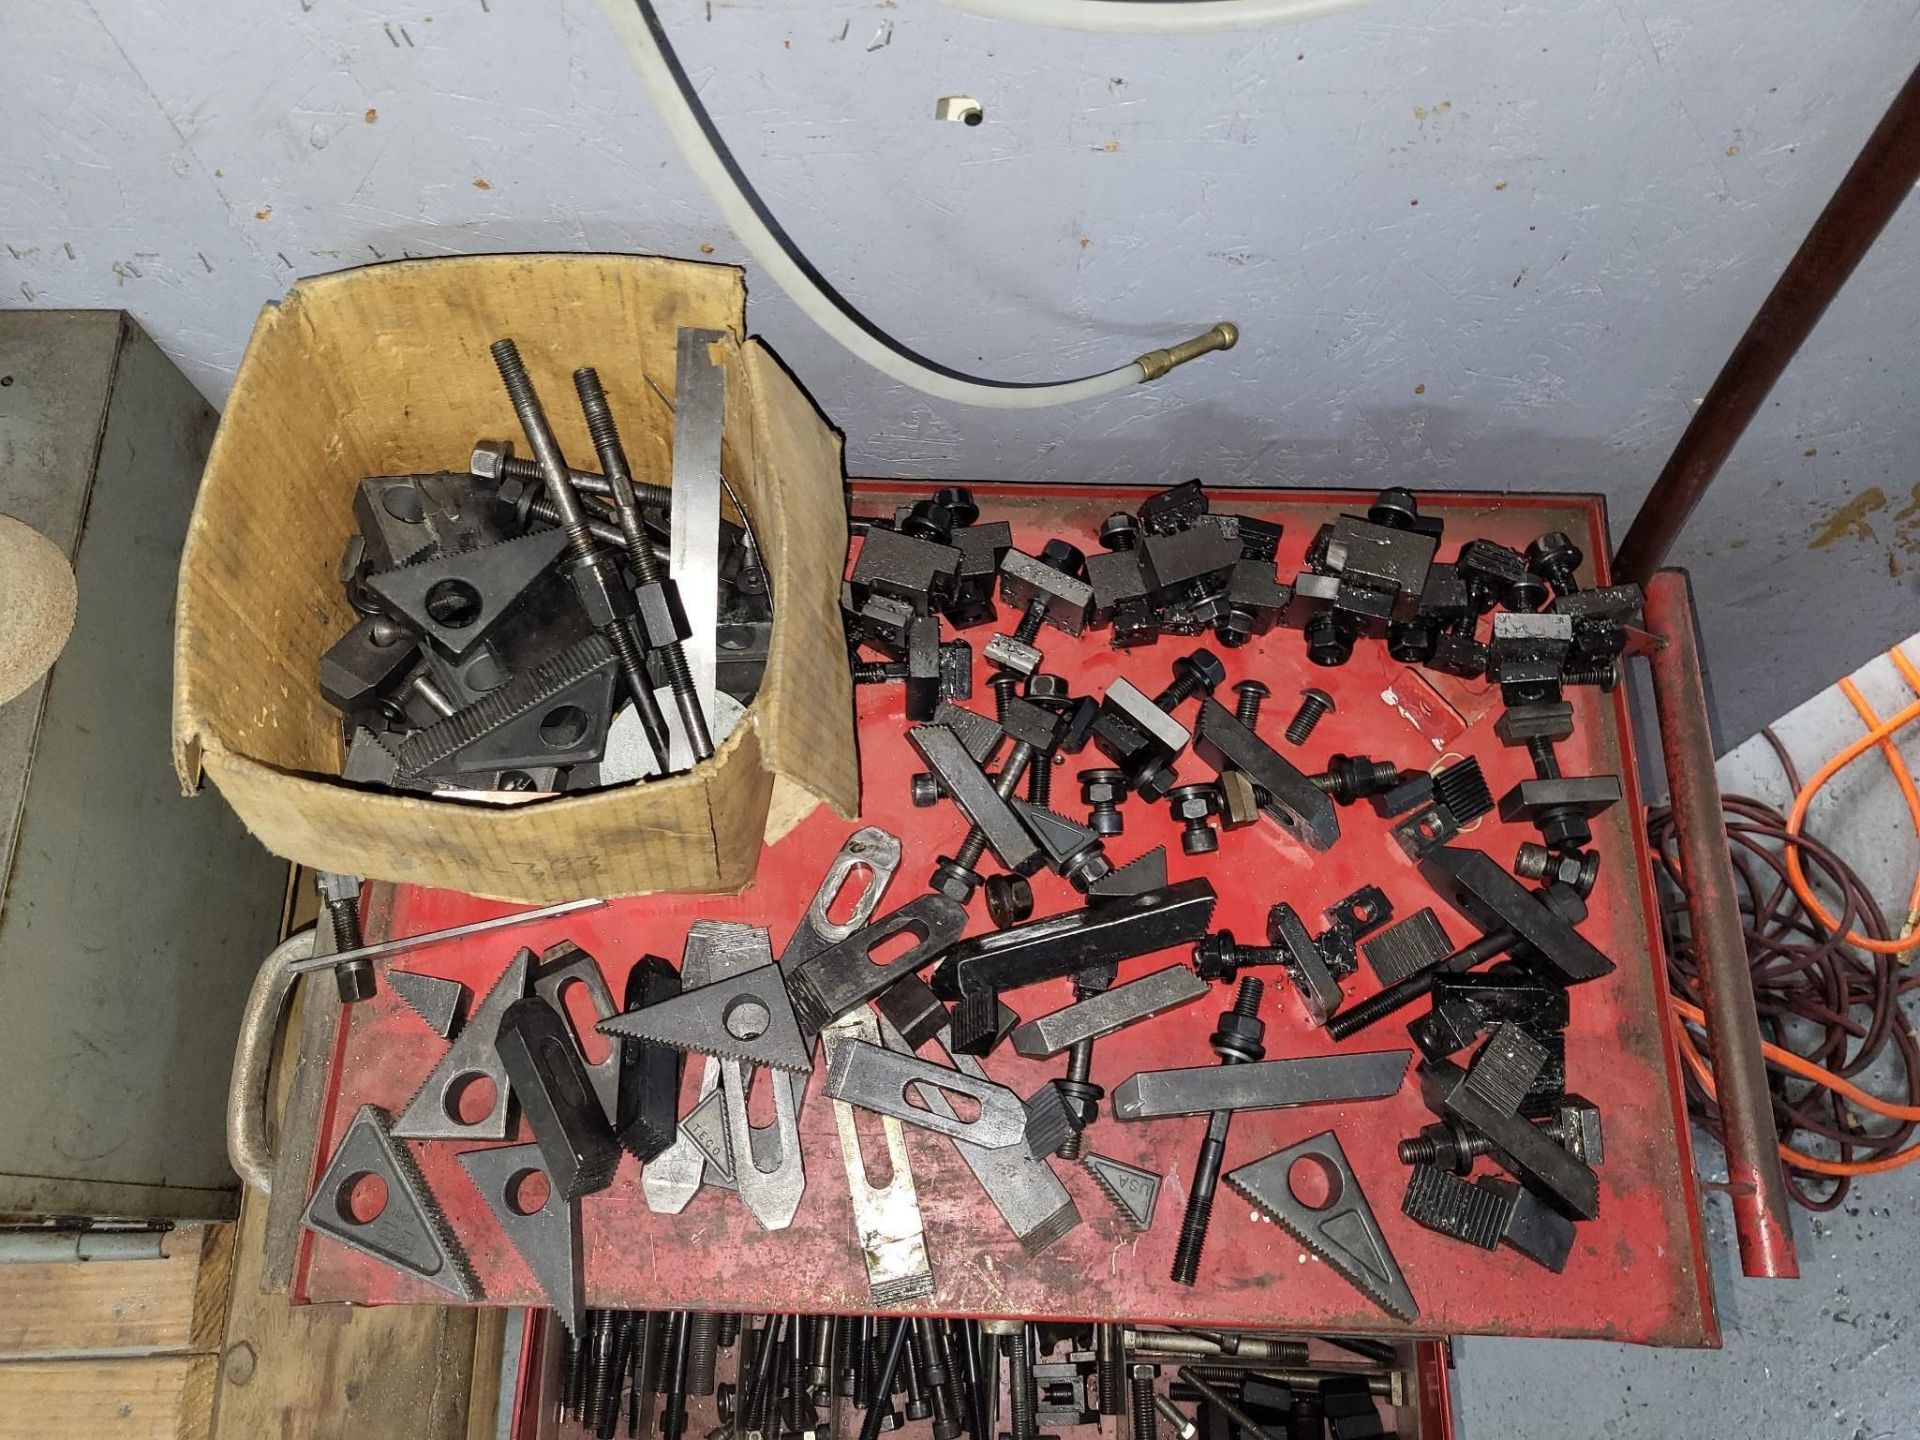 LARGE LOT OF MILLING TOOLS, TAPS, CARBIDE INSERTS, SETUP HARDWARE AND HAND TOOLS - Image 2 of 24